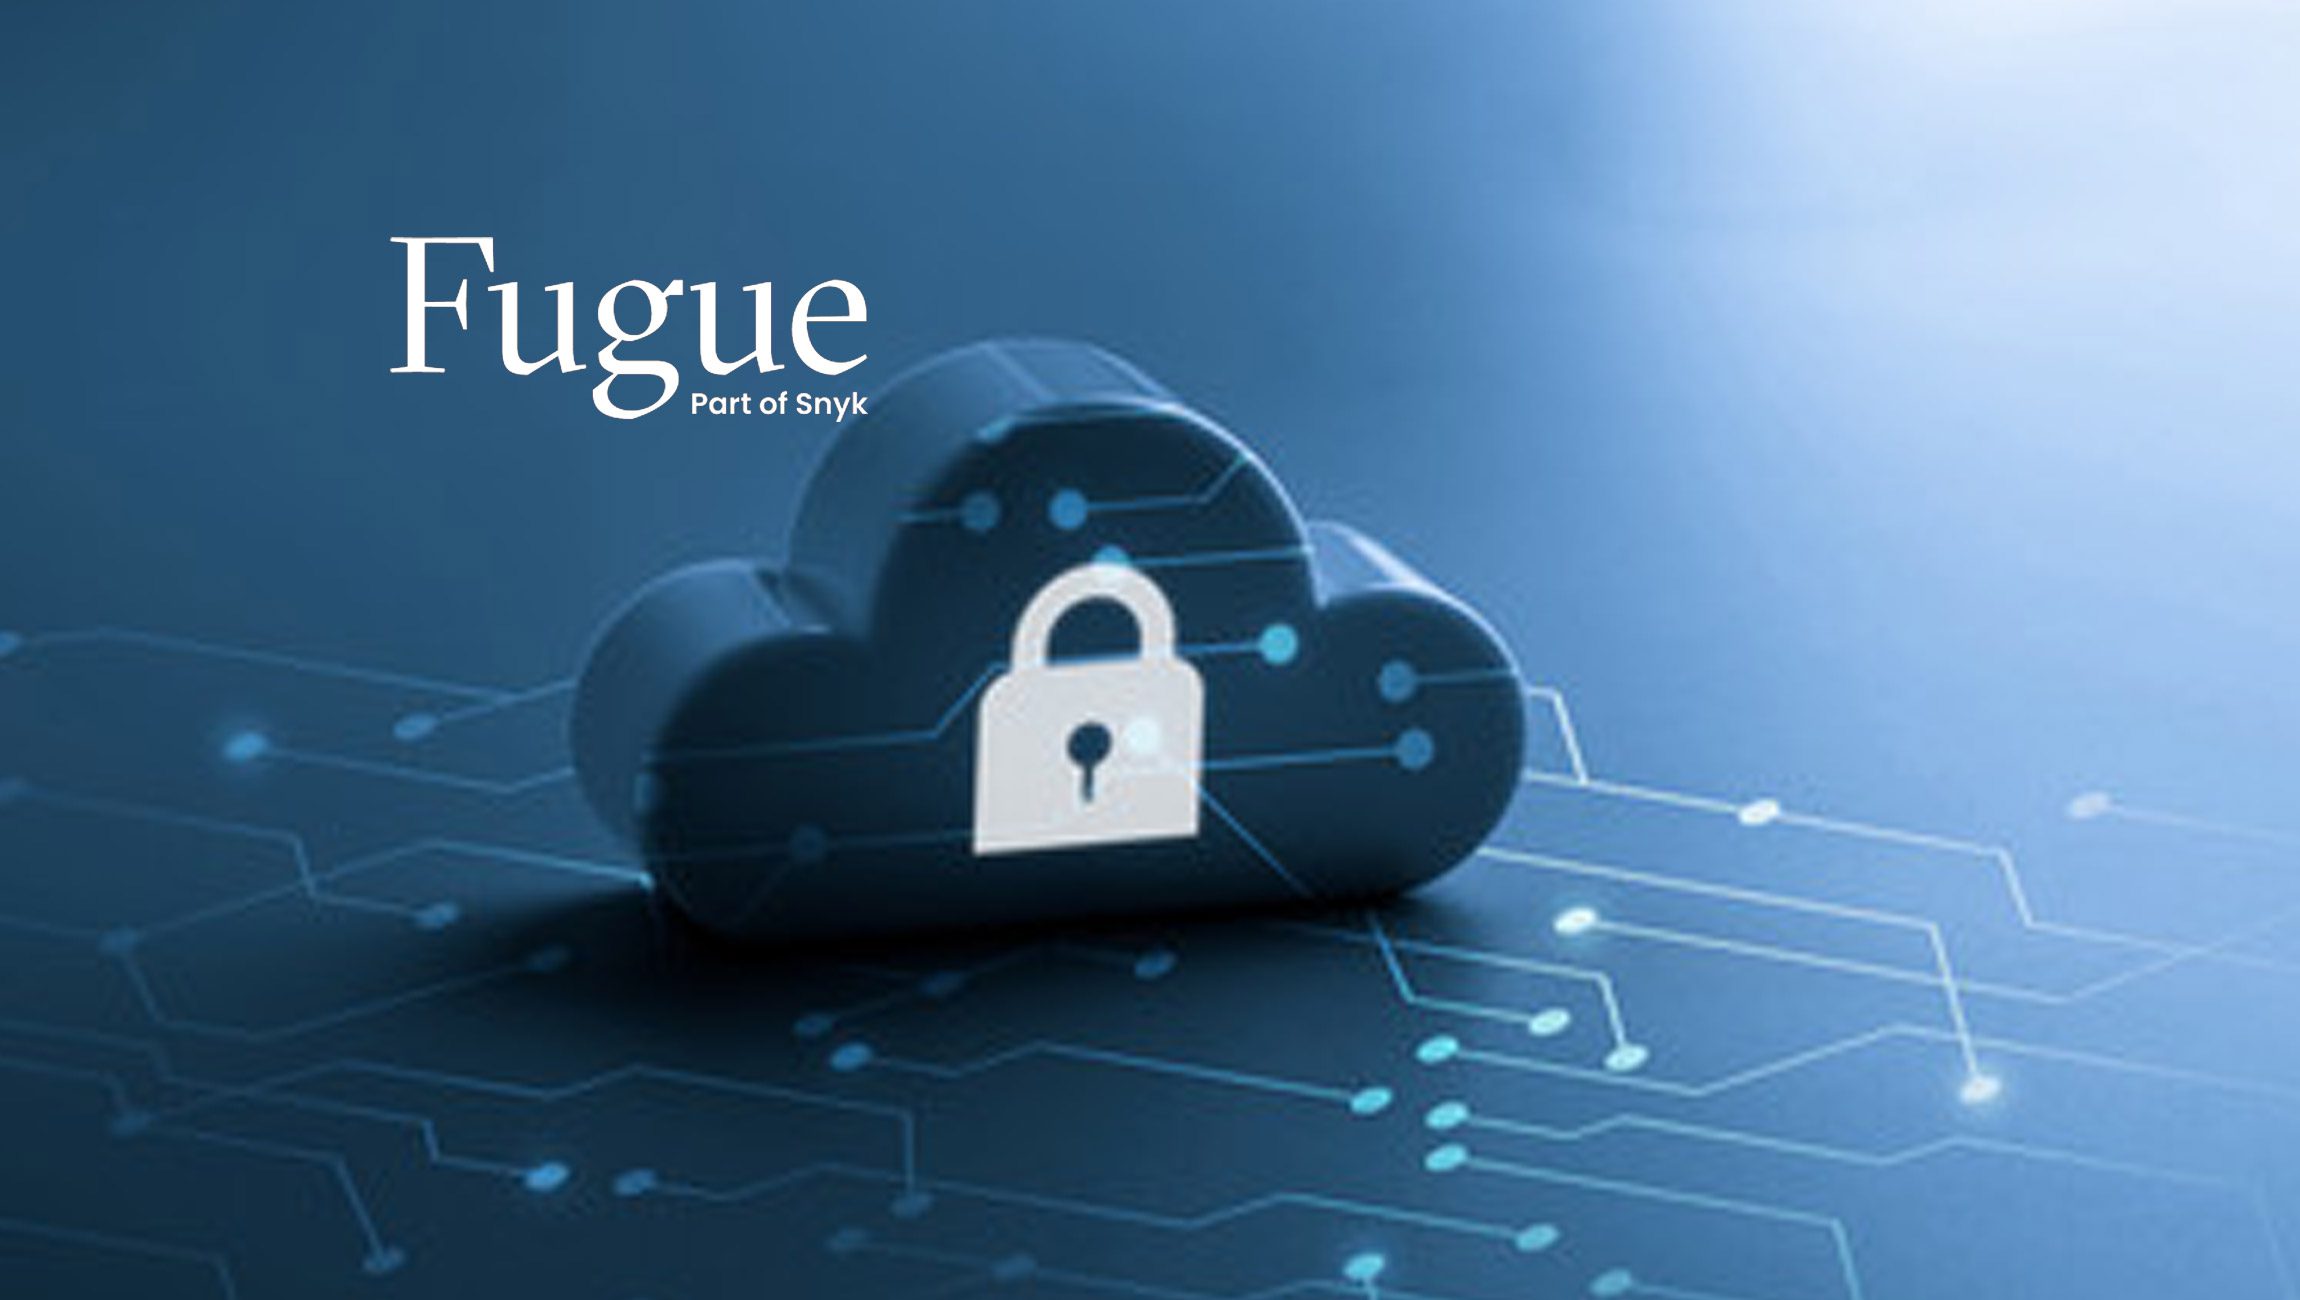 9 Questions You Should Ask About Your Cloud Security